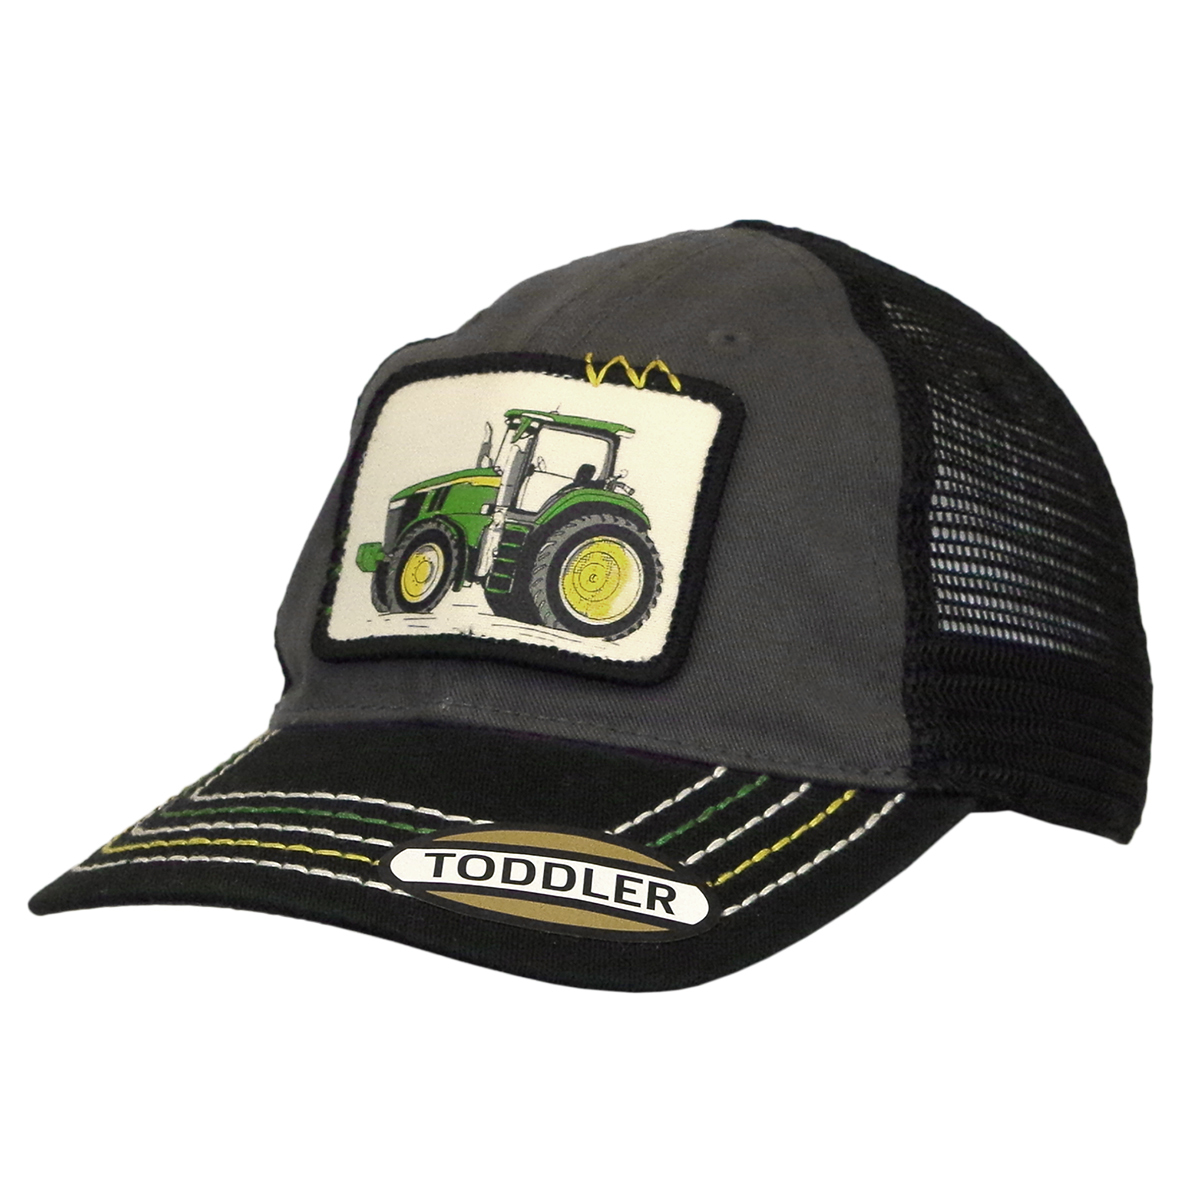 Do Good Today - Toddler Tractor Mesh Back Hat